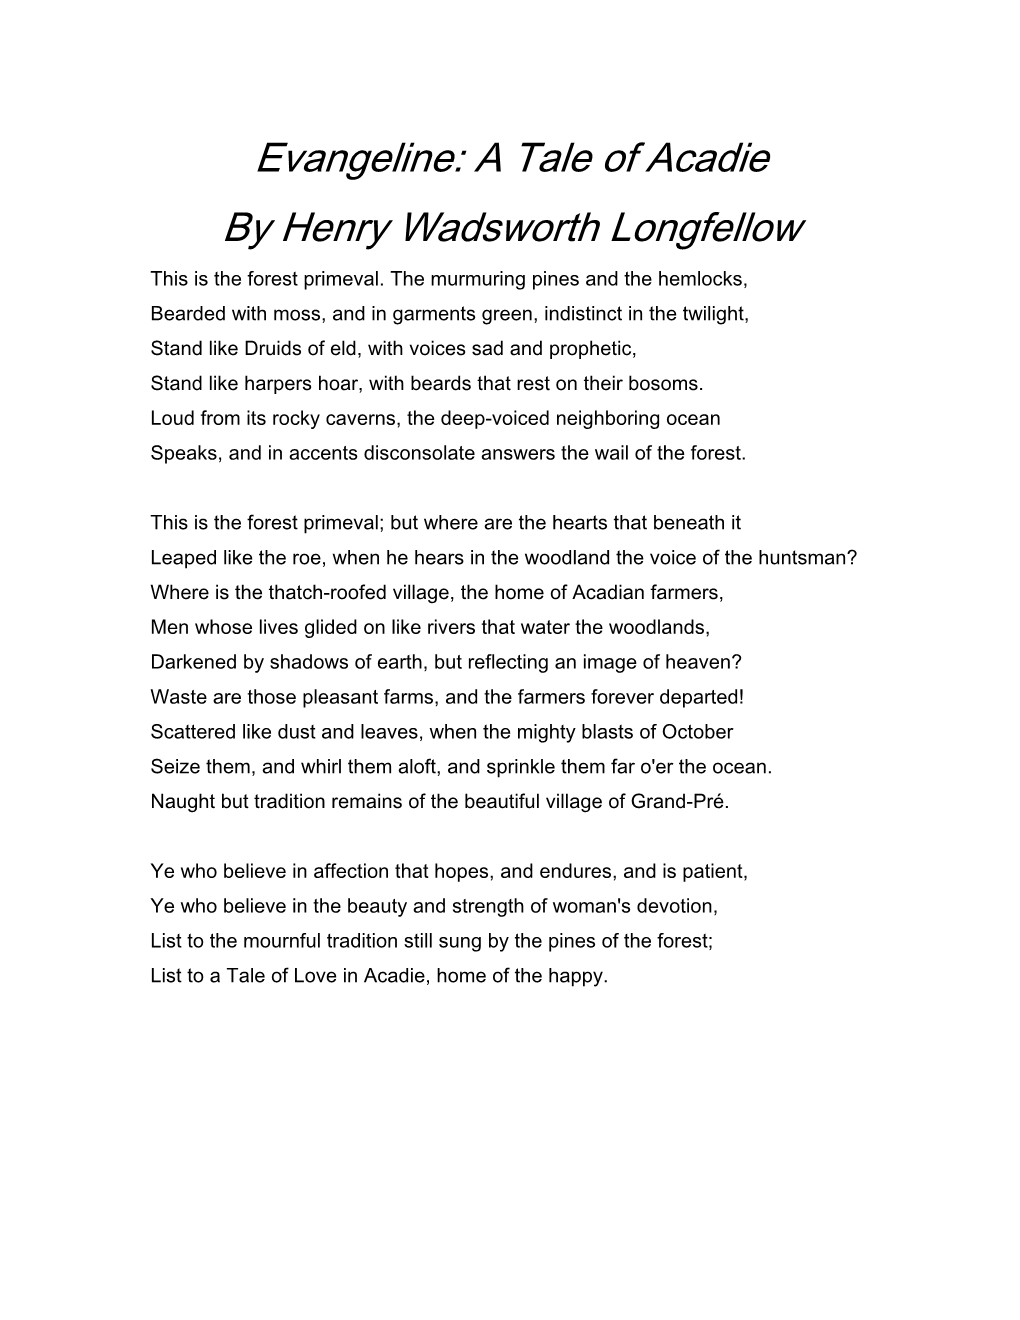 Evangeline: a Tale of Acadie by Henry Wadsworth Longfellow This Is the Forest Primeval